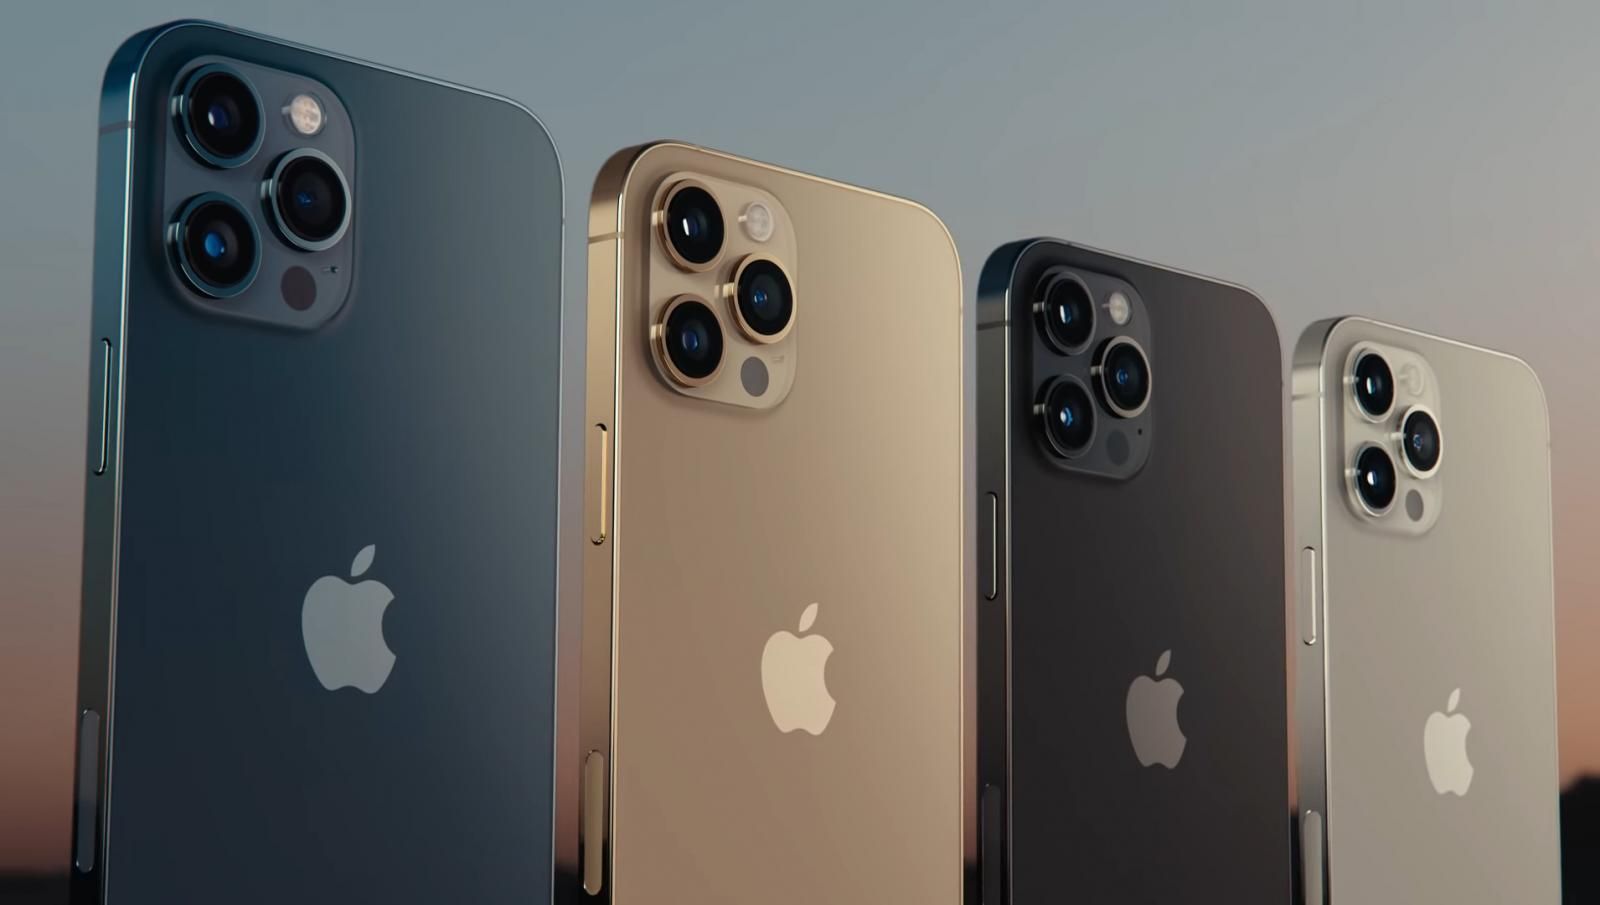 iPhone 12 Pro Max in a choice of four colors